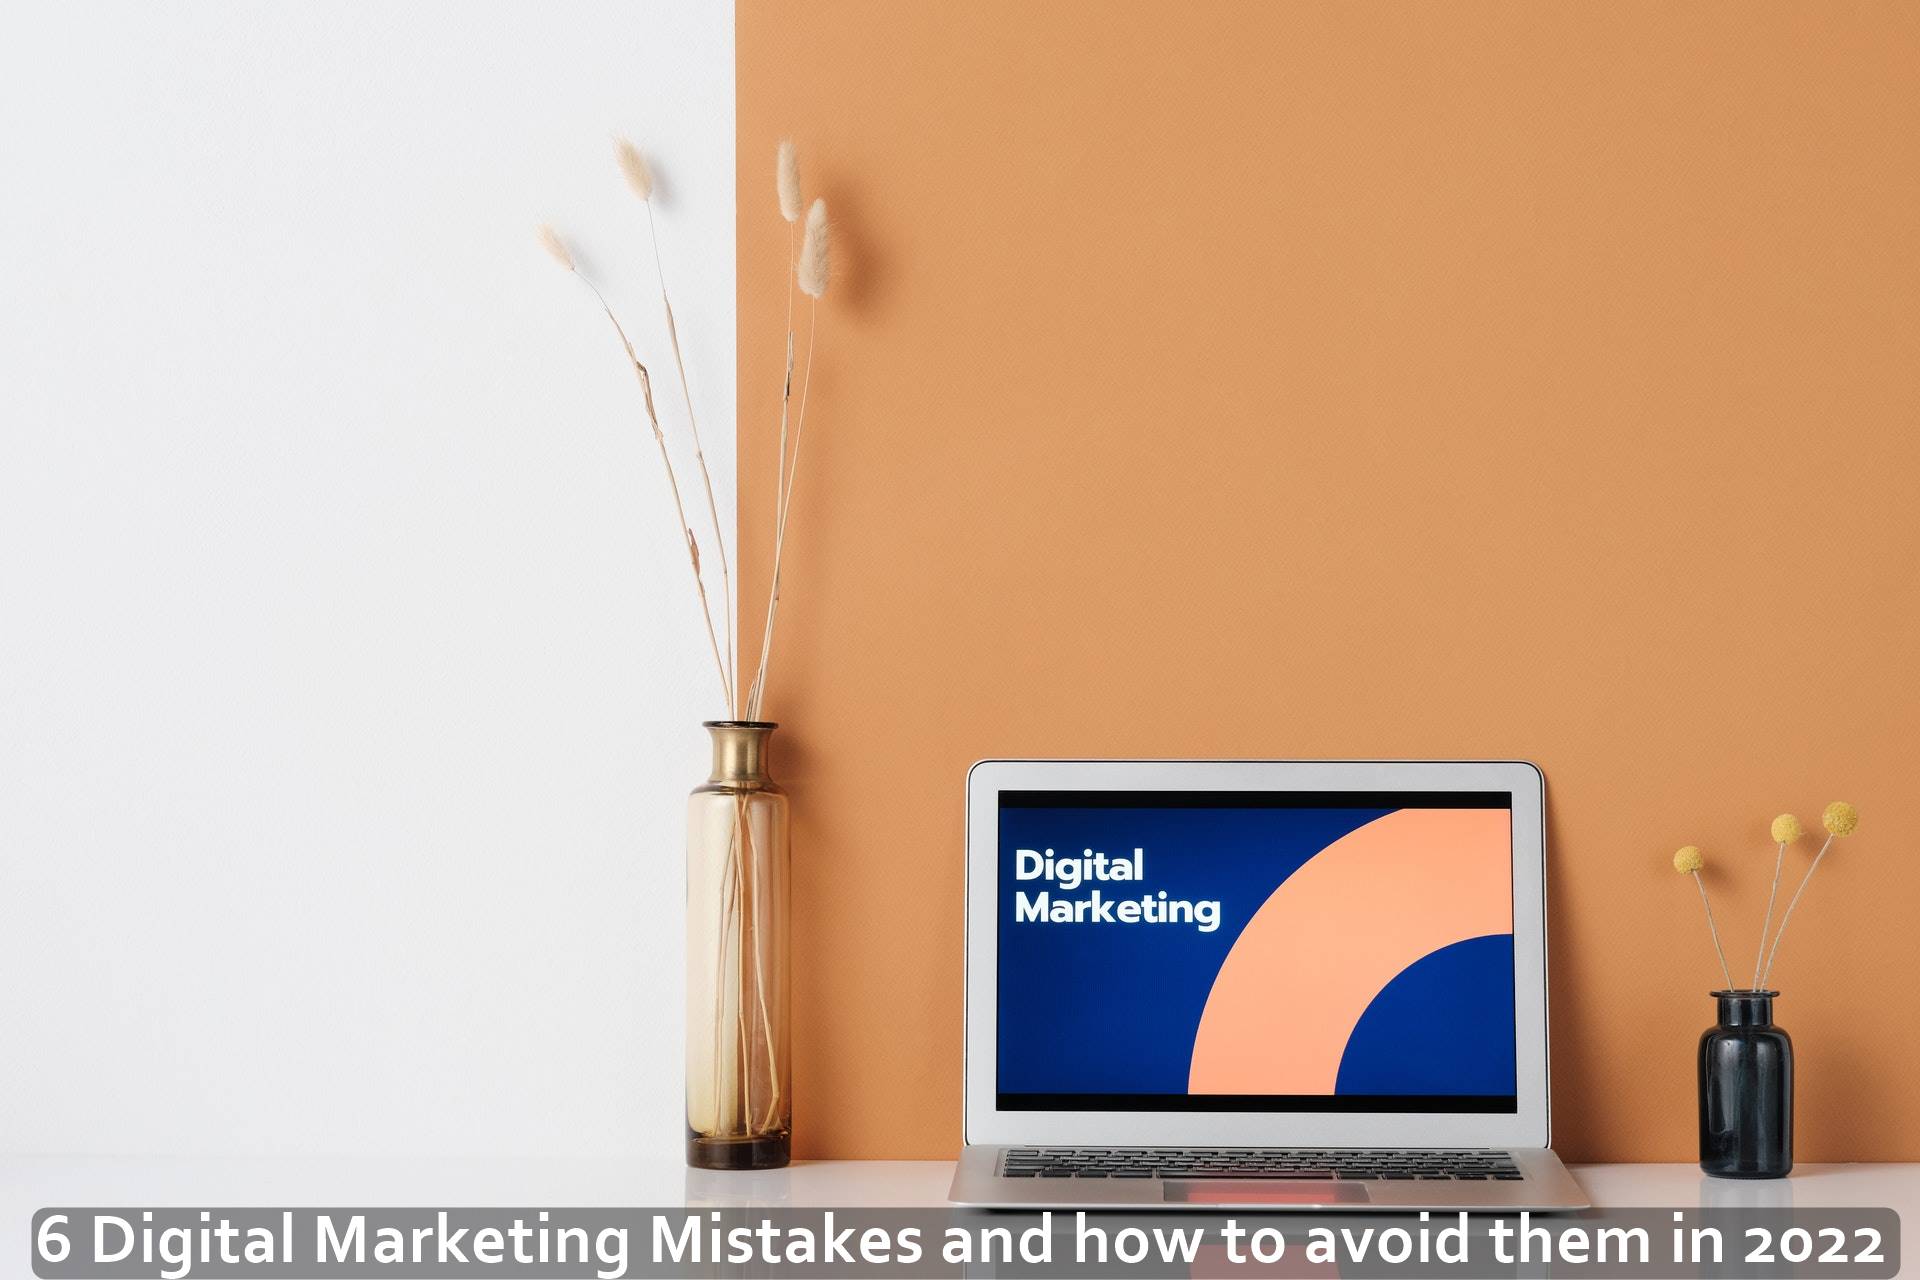 6 Digital Marketing Mistakes and how to avoid them in 2022